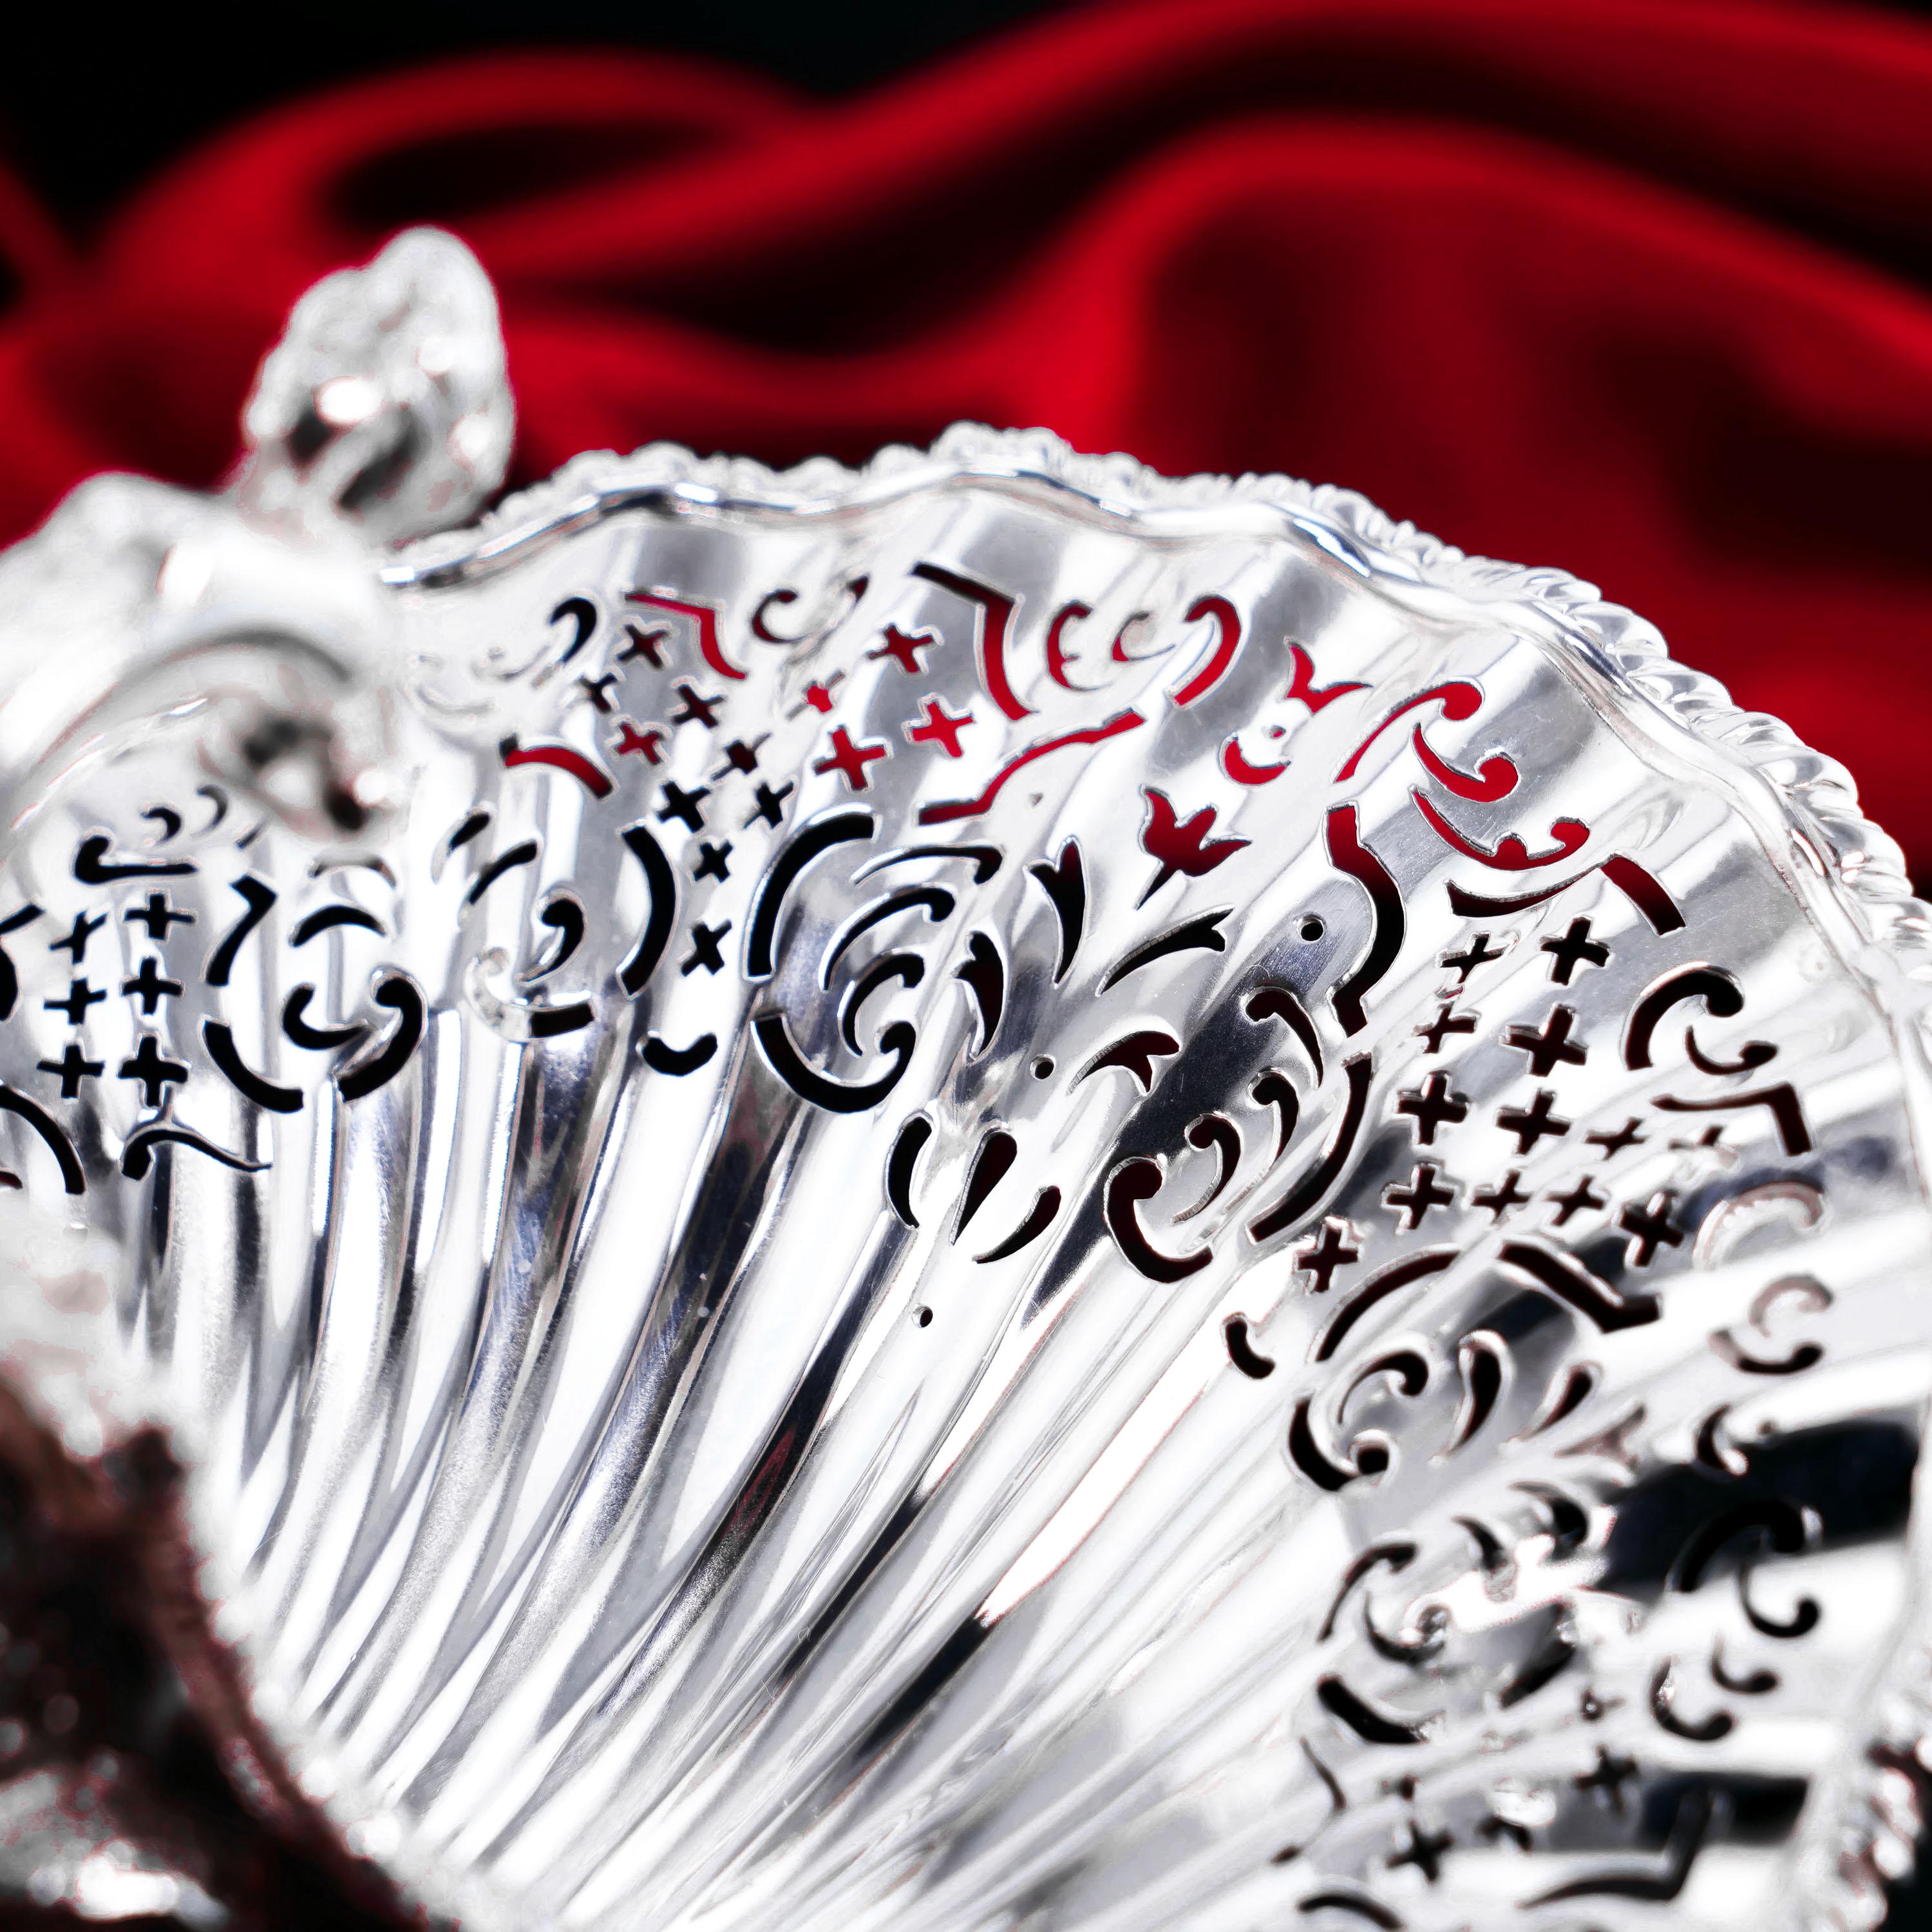 Antique SterlingSilver Rococo Shell Dish in the Manner of Paul de Lamerie - 1908 For Sale 5